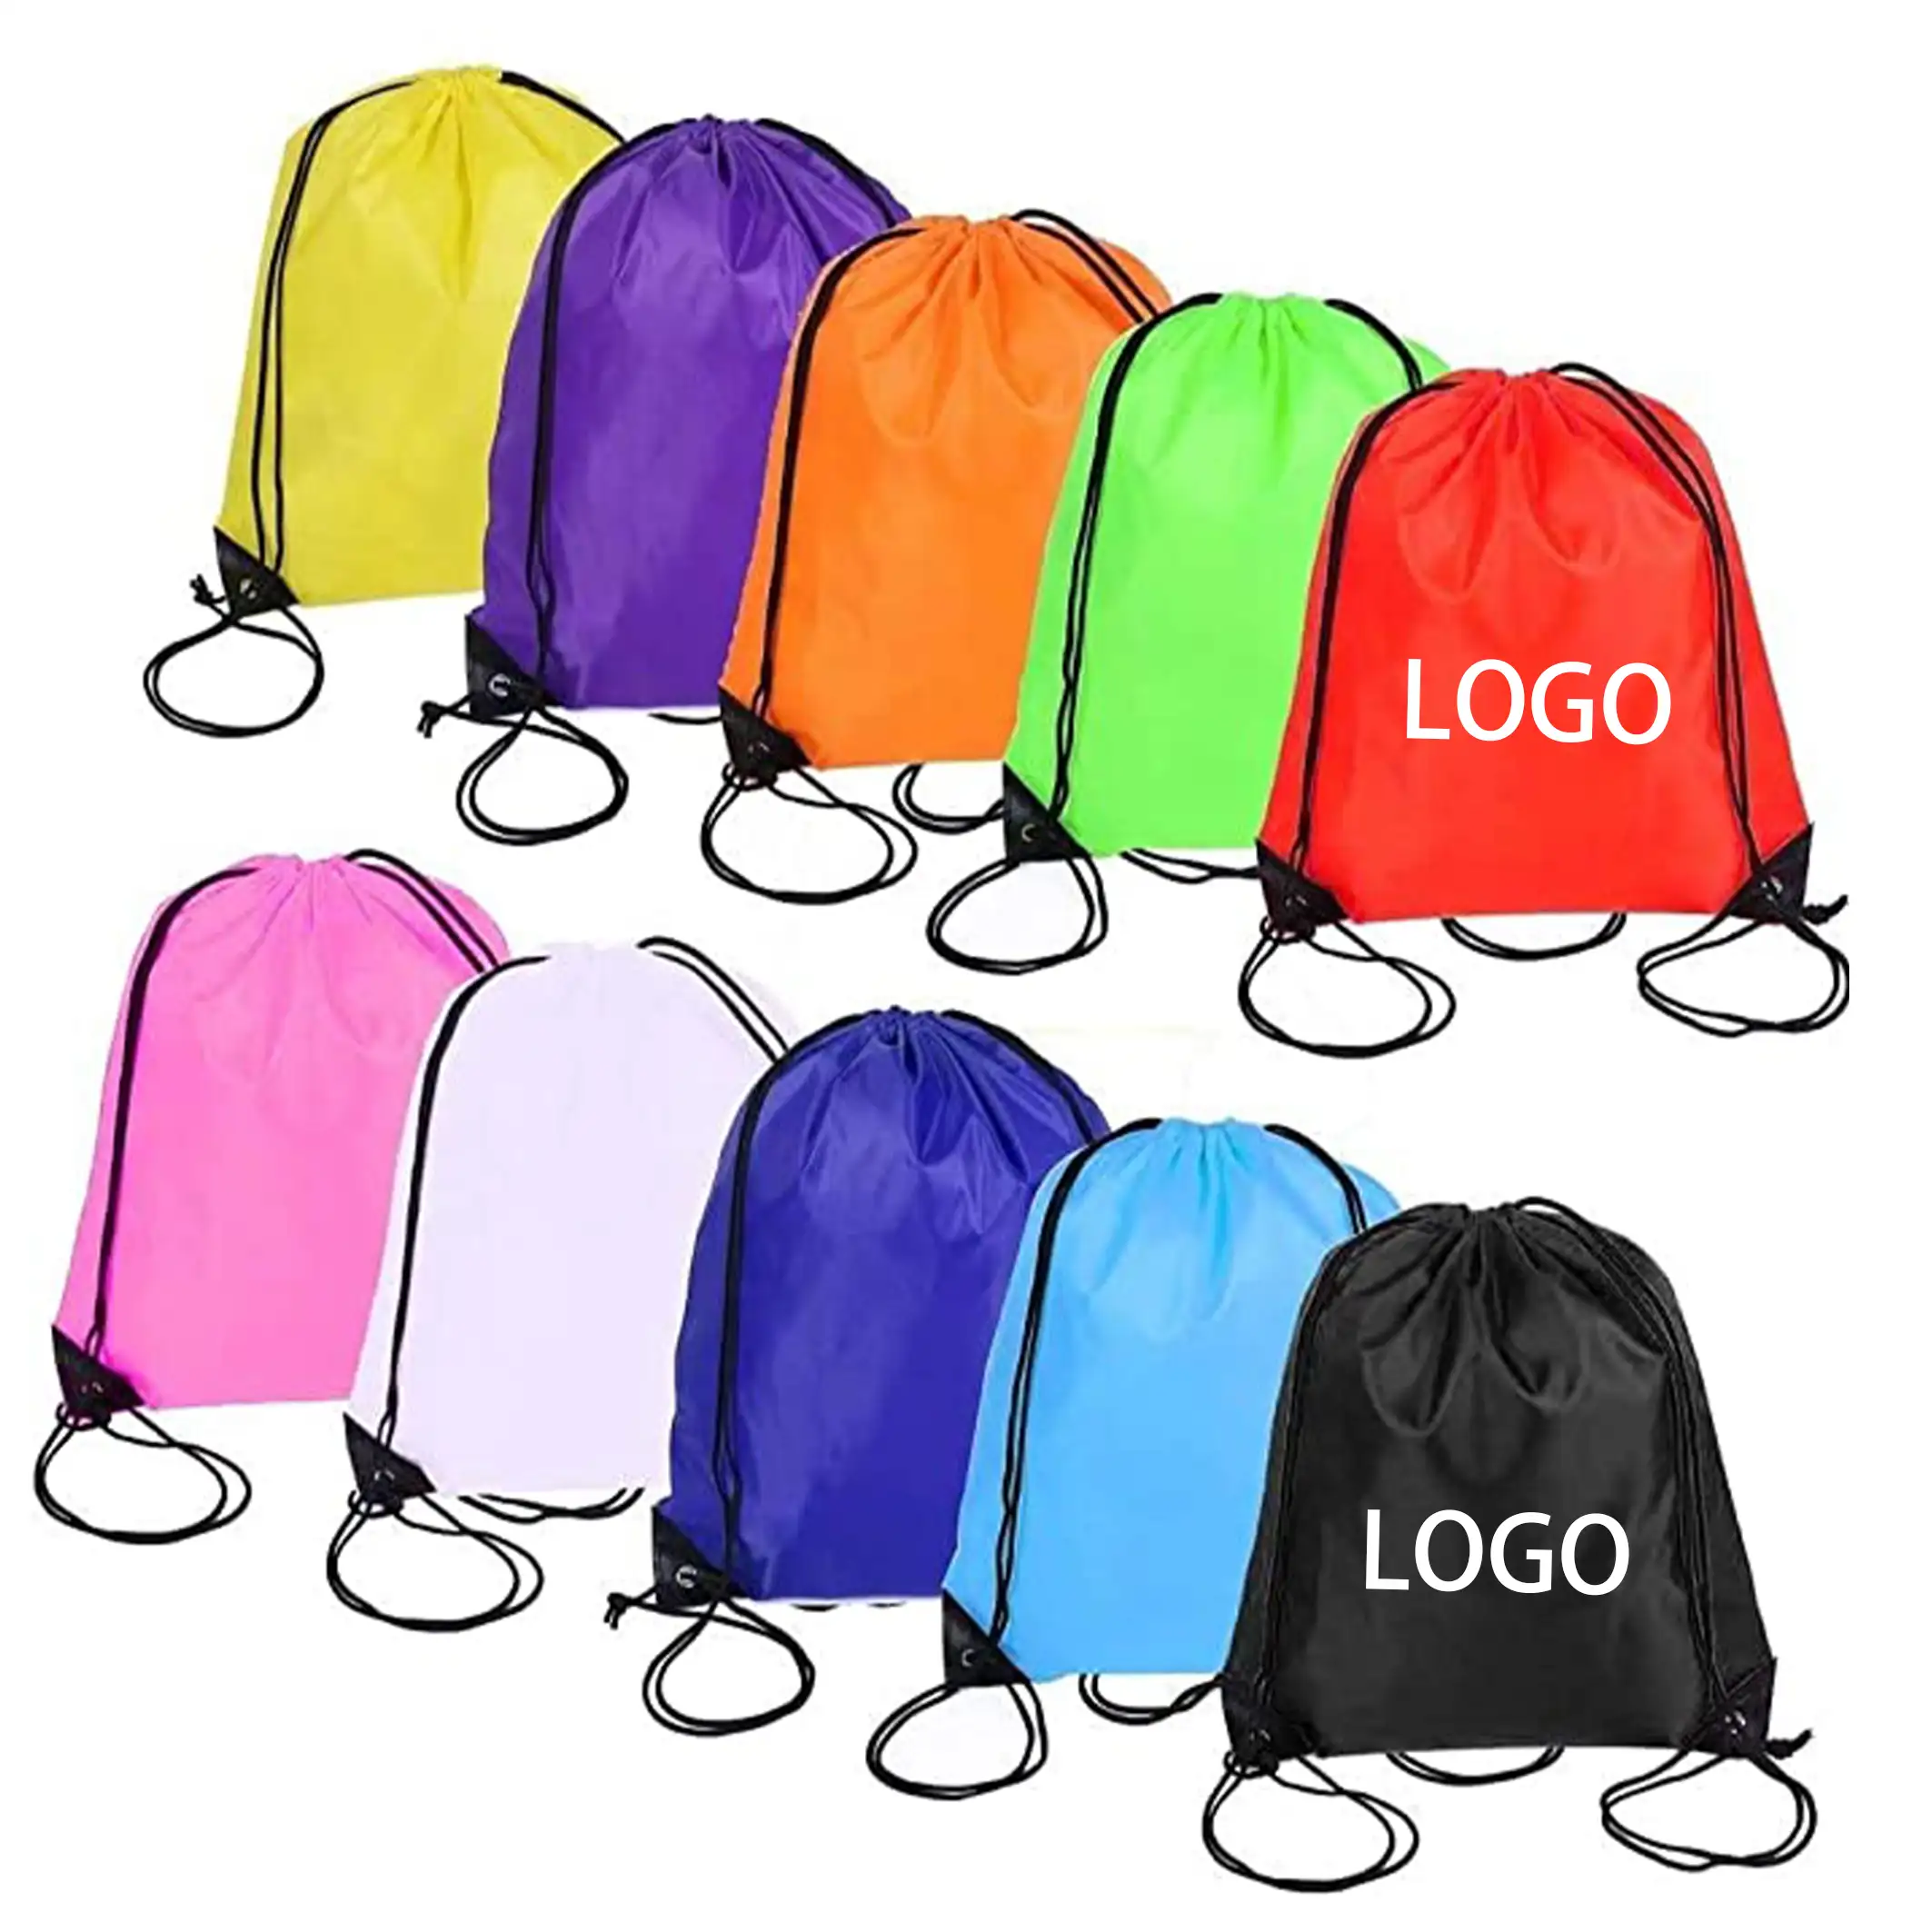 Magic design custom promotional sports bags recycled waterproof polyester drawstring bag with logo